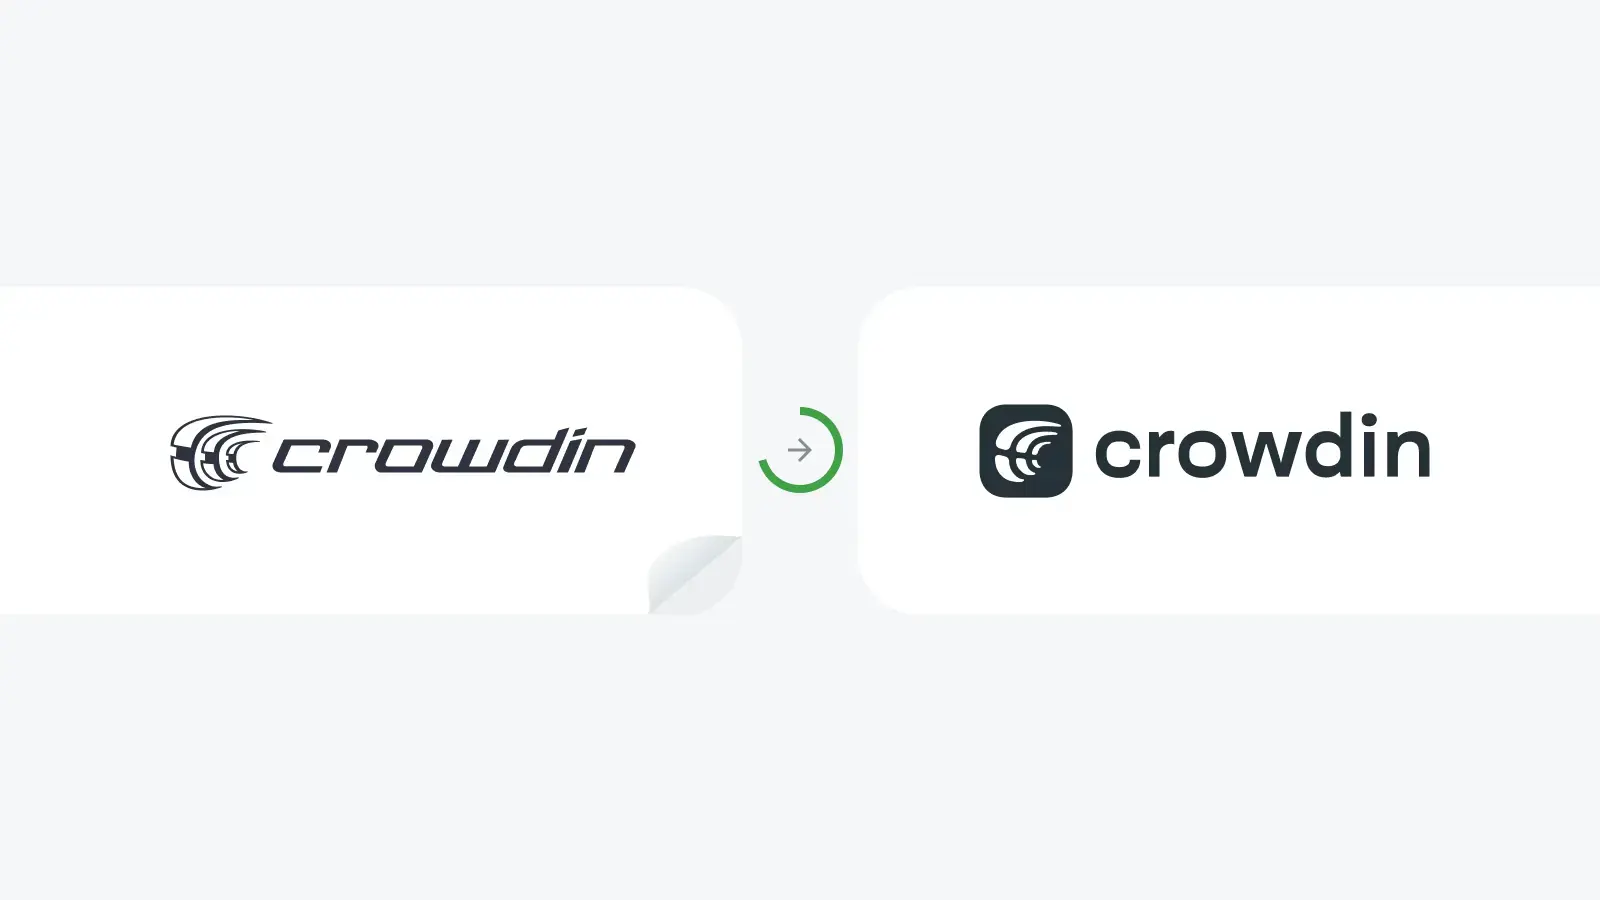 Updated Crowdin Logo Unveiled